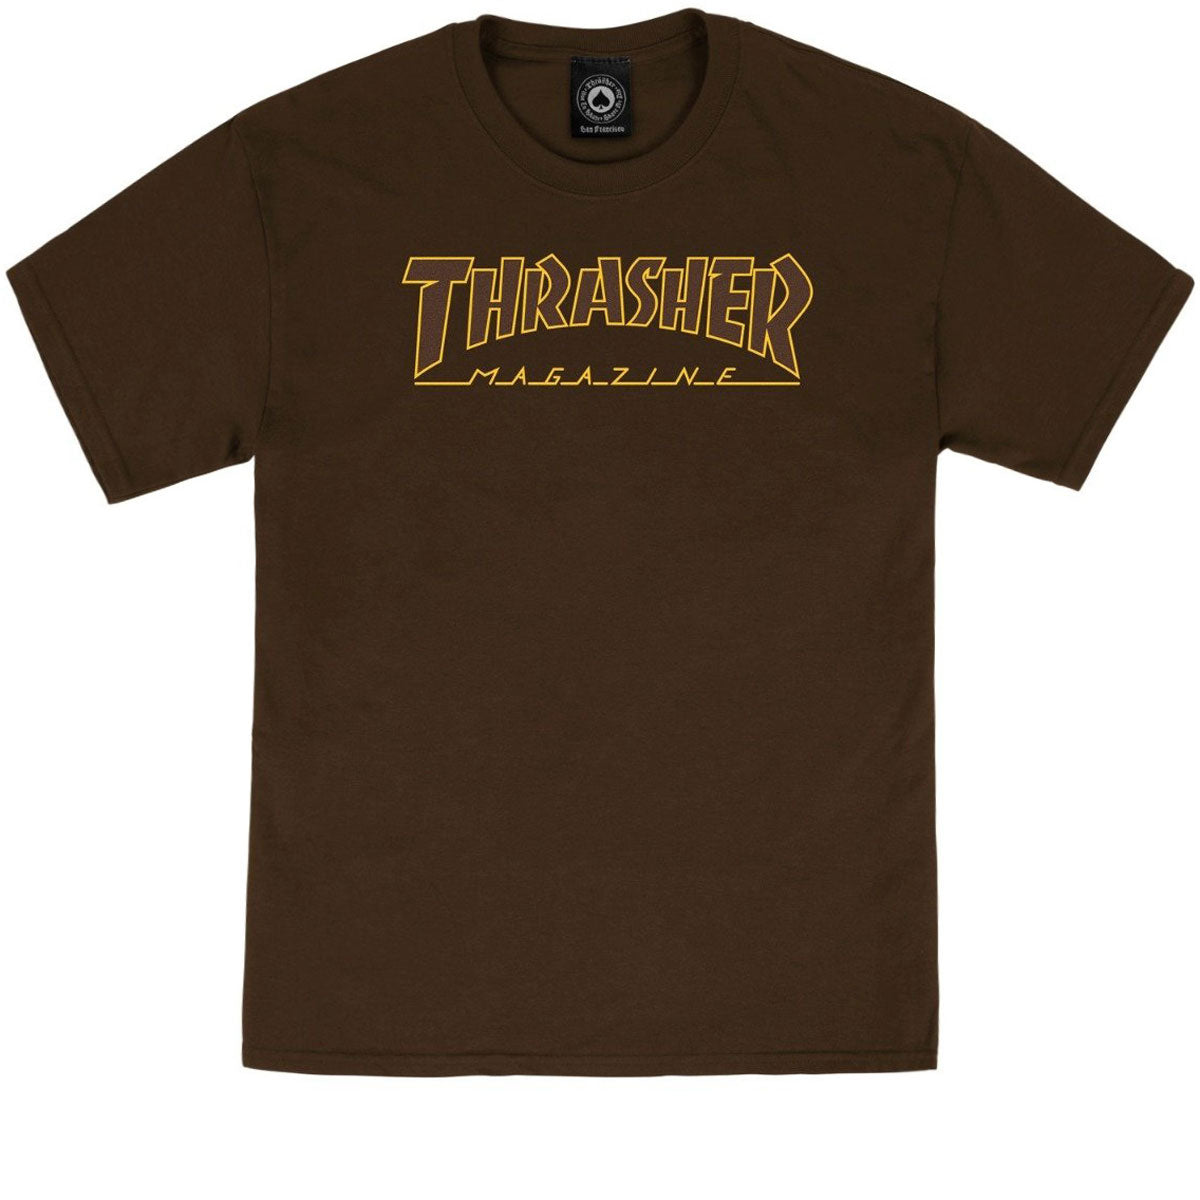 Thrasher Outlined T-Shirt - Dark Chocolate image 1